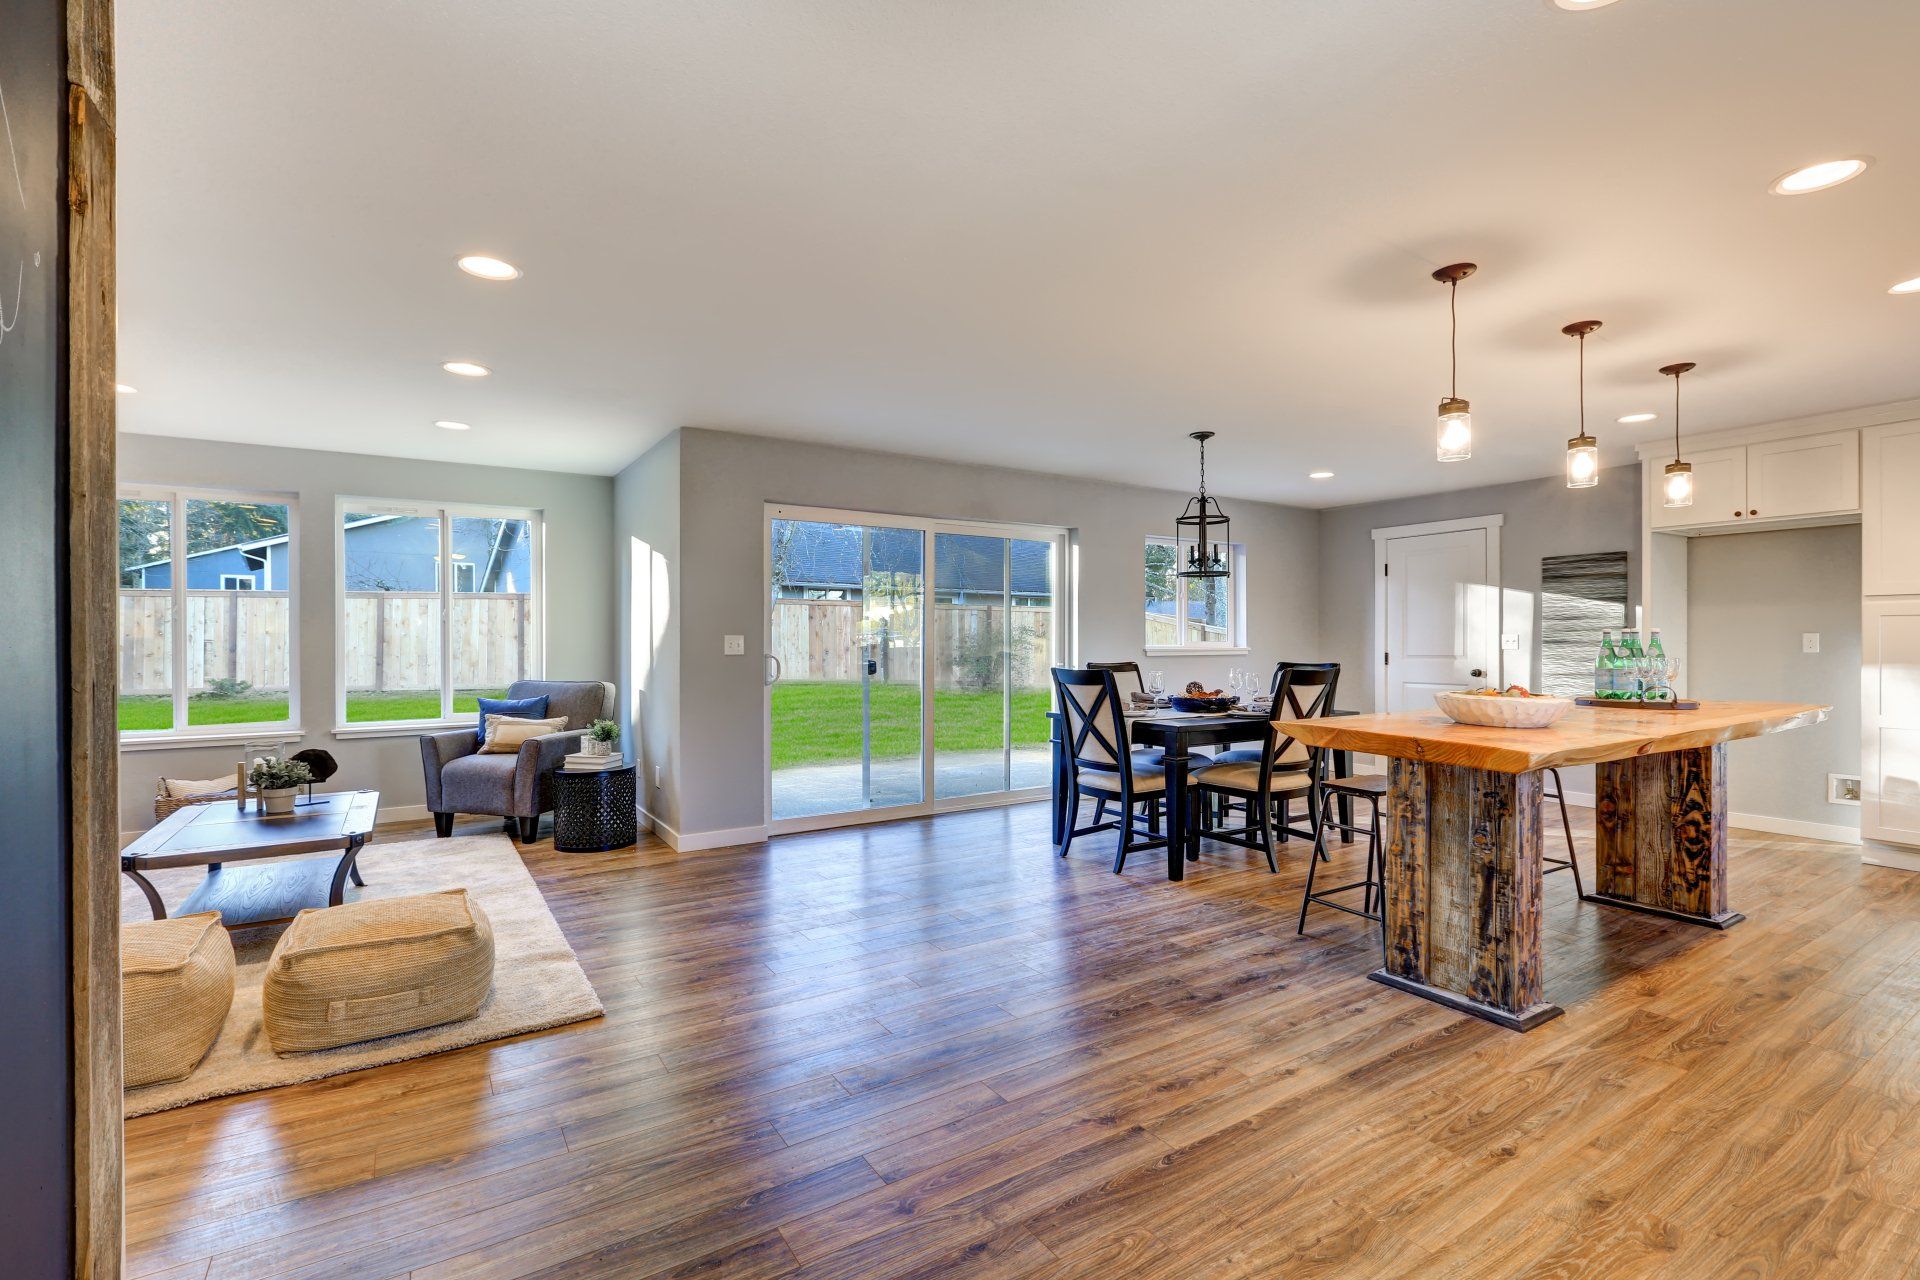 Why You Should Have Your Hardwood Floors Cleaned Professionally